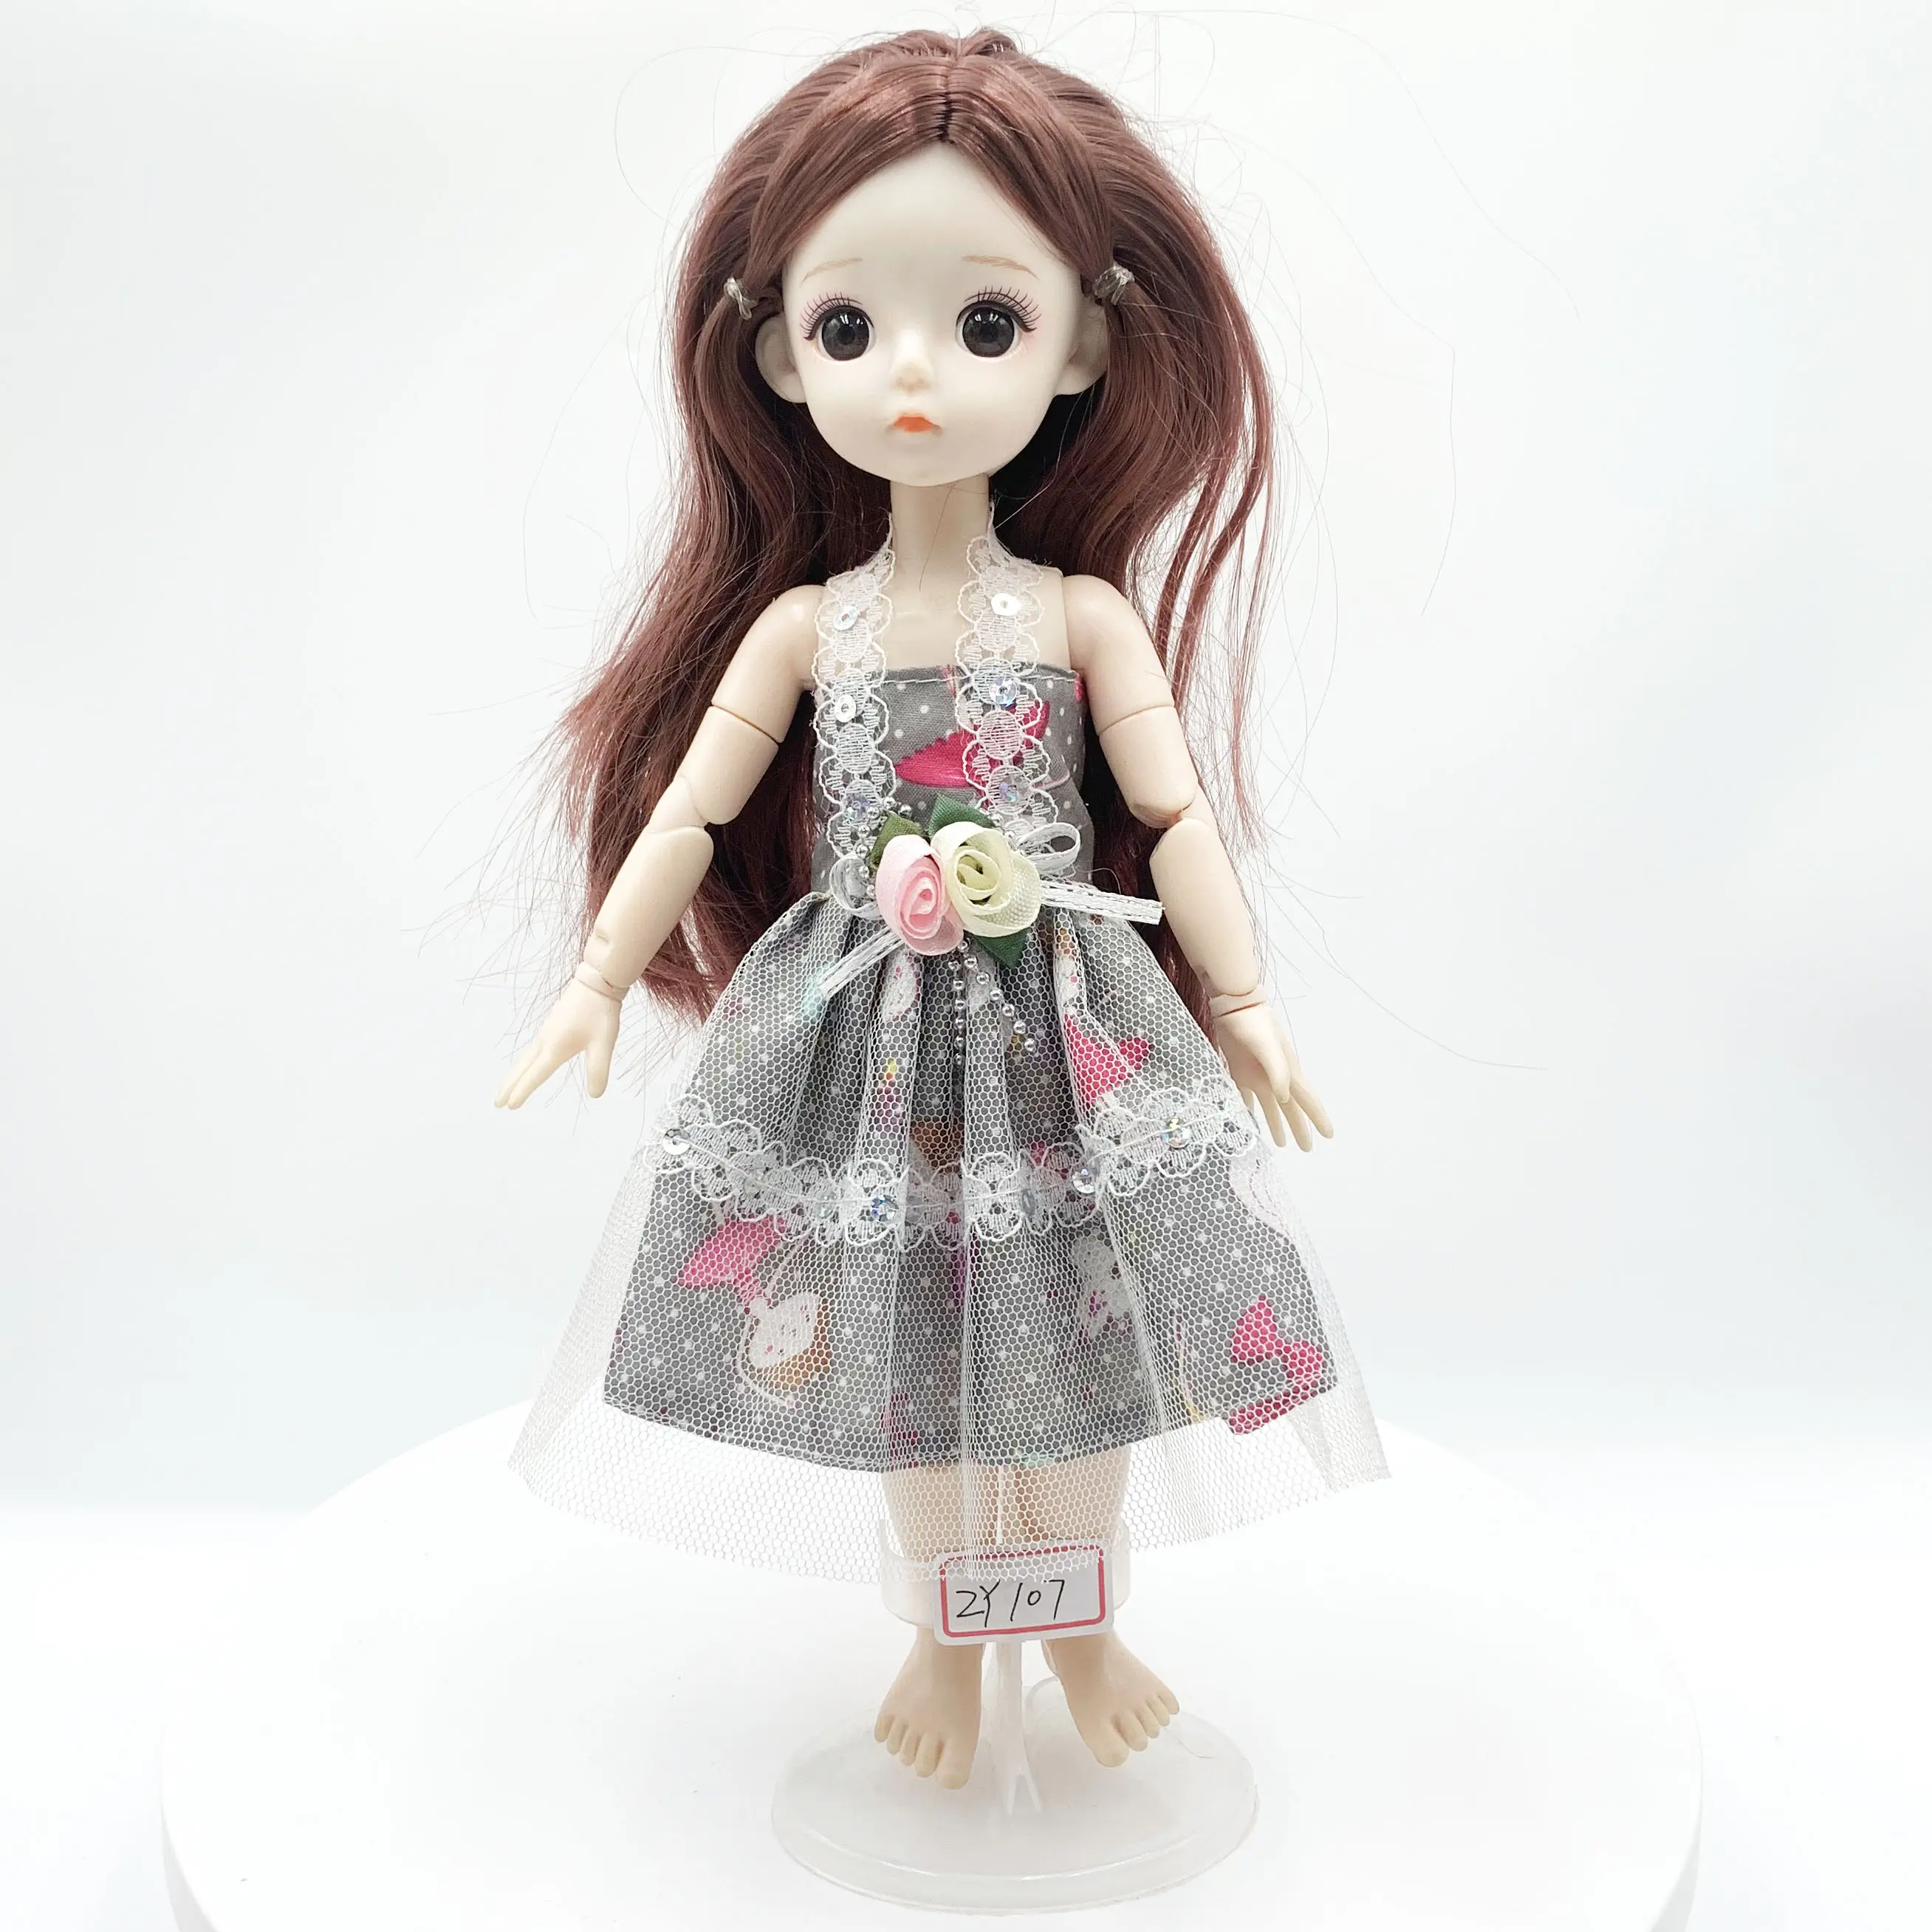 The factory supplies a brand new collection of doll clothes simulated dress up dolls